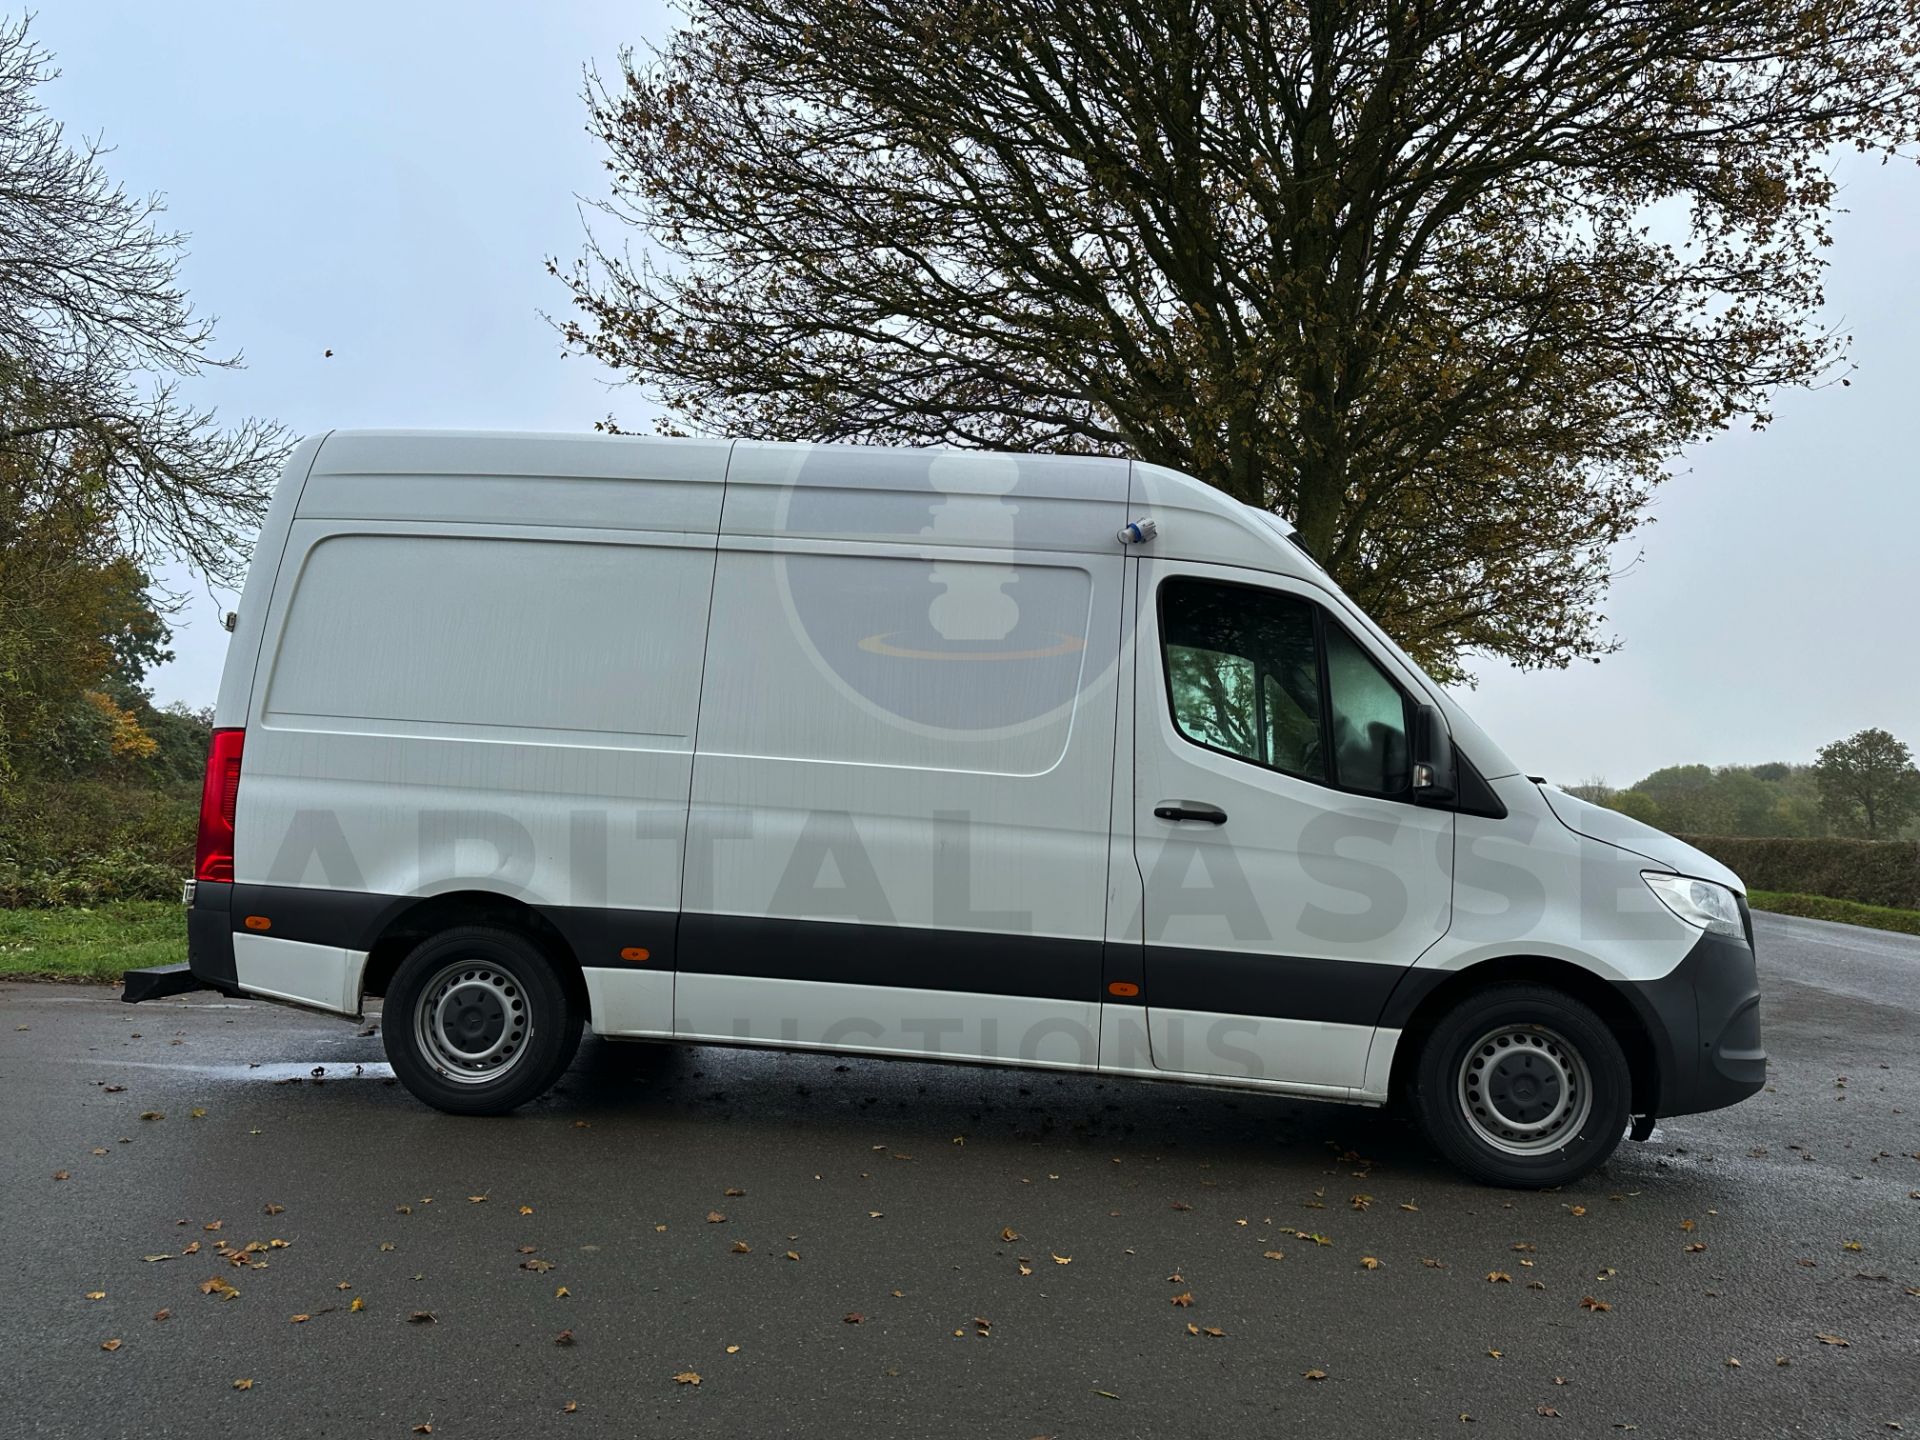 MERCEDES-BENZ SPRINTER 314 CDI *MWB - REFRIGERATED VAN* (2019 - FACELIFT MODEL) *OVERNIGHT STANDBY* - Image 14 of 45